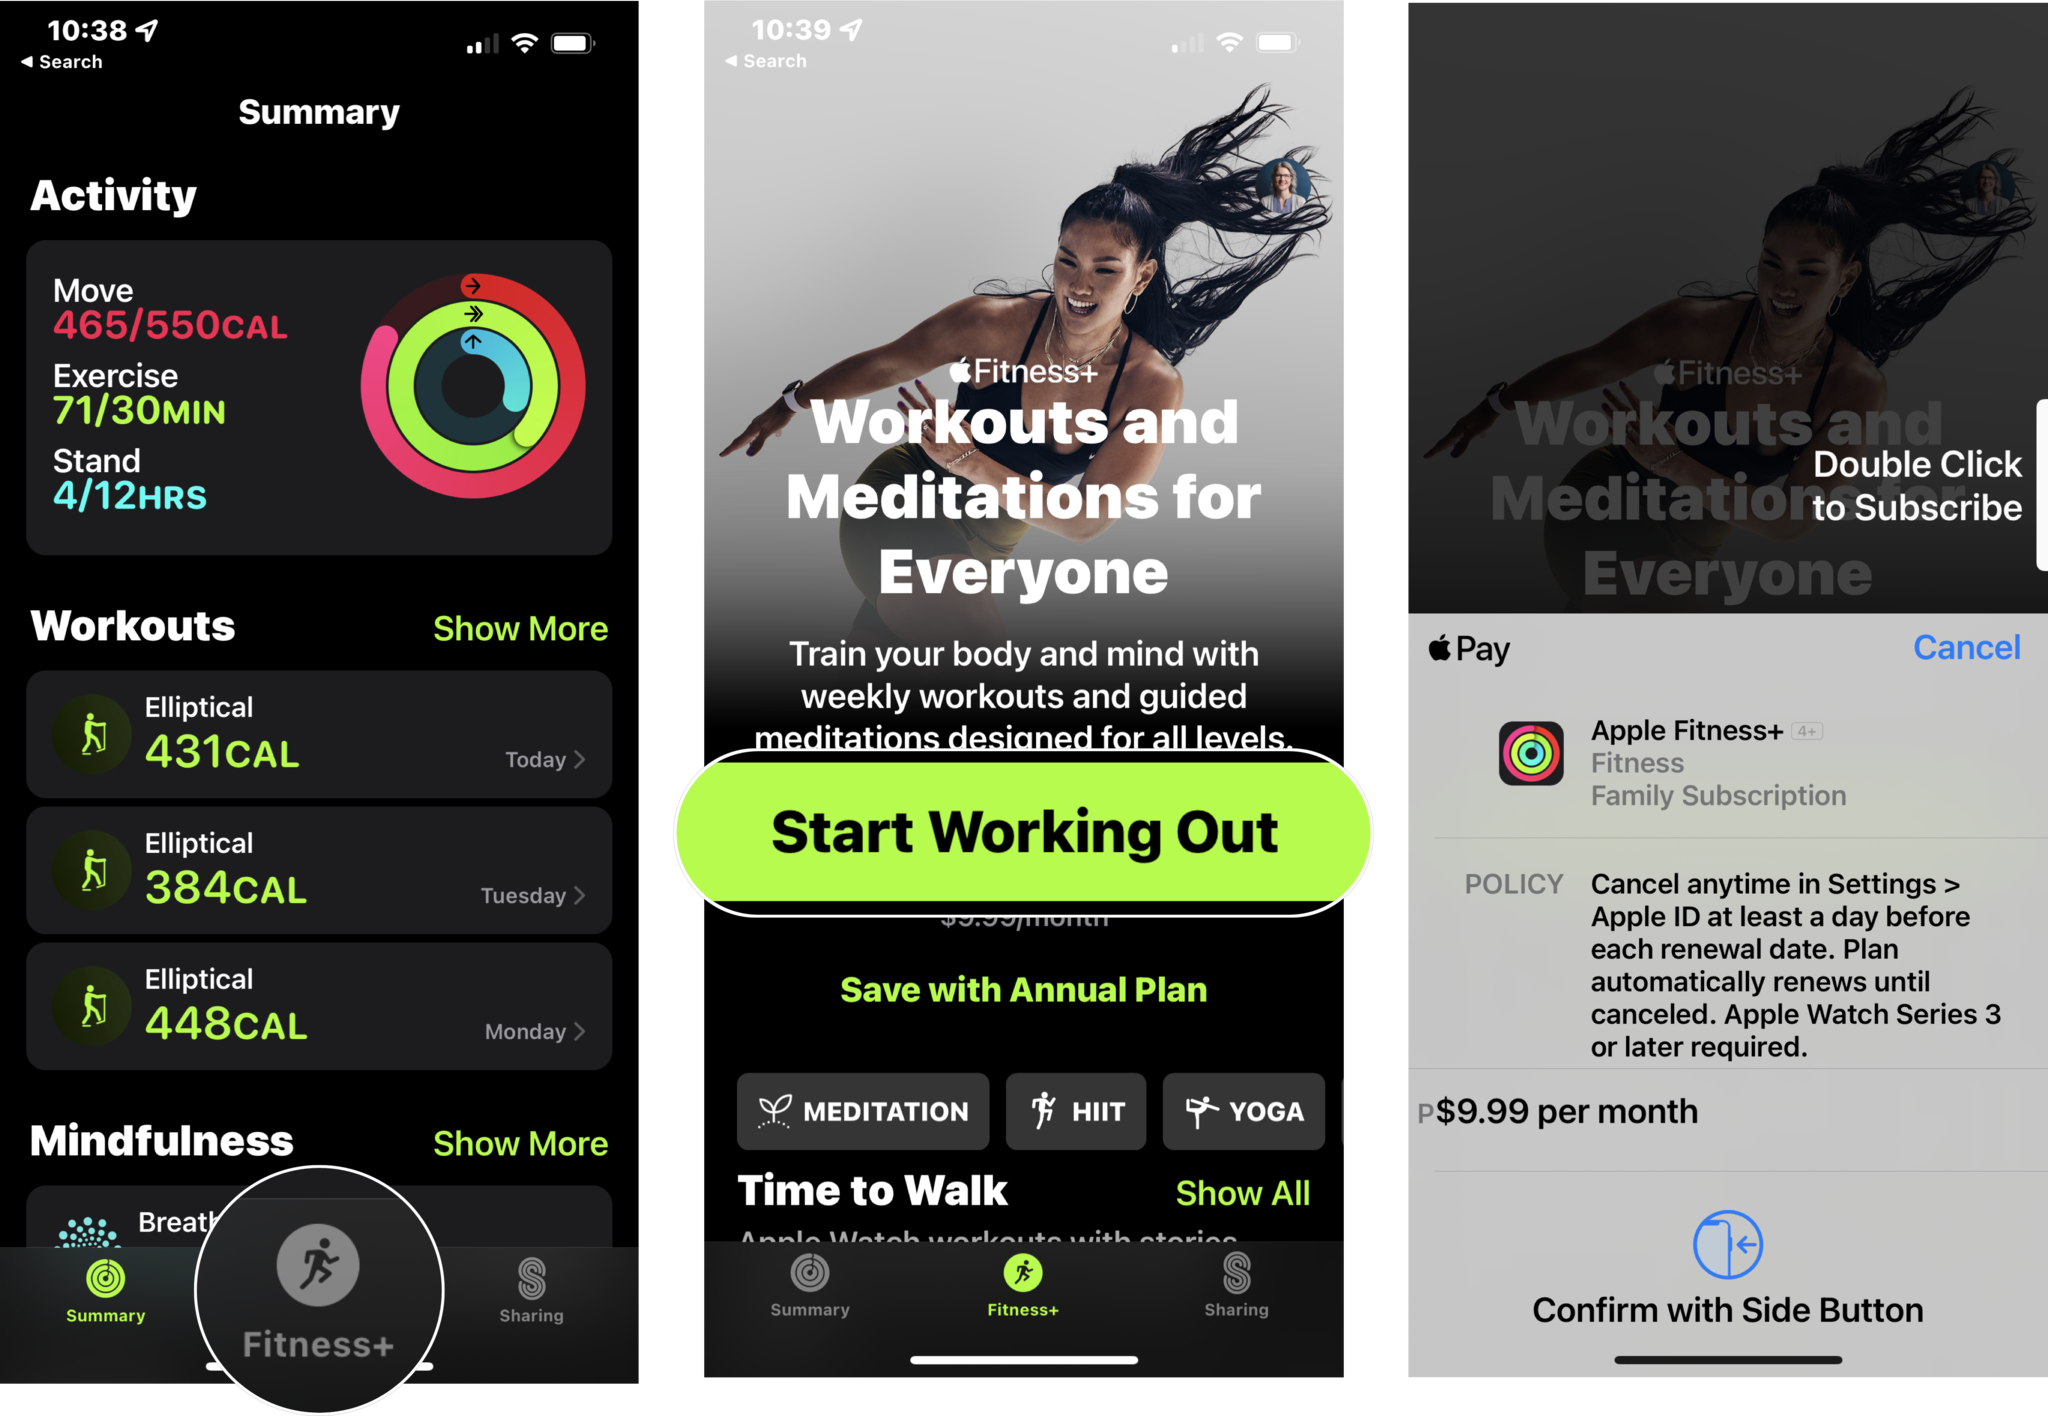 How to set up Apple Fitness+: In Fitness app, tap the Fitness+ tab, tap Get Started, Try It Free, or Start Working Out, select the trial offer (if appropriate), and confirm your payment details to subscribe.